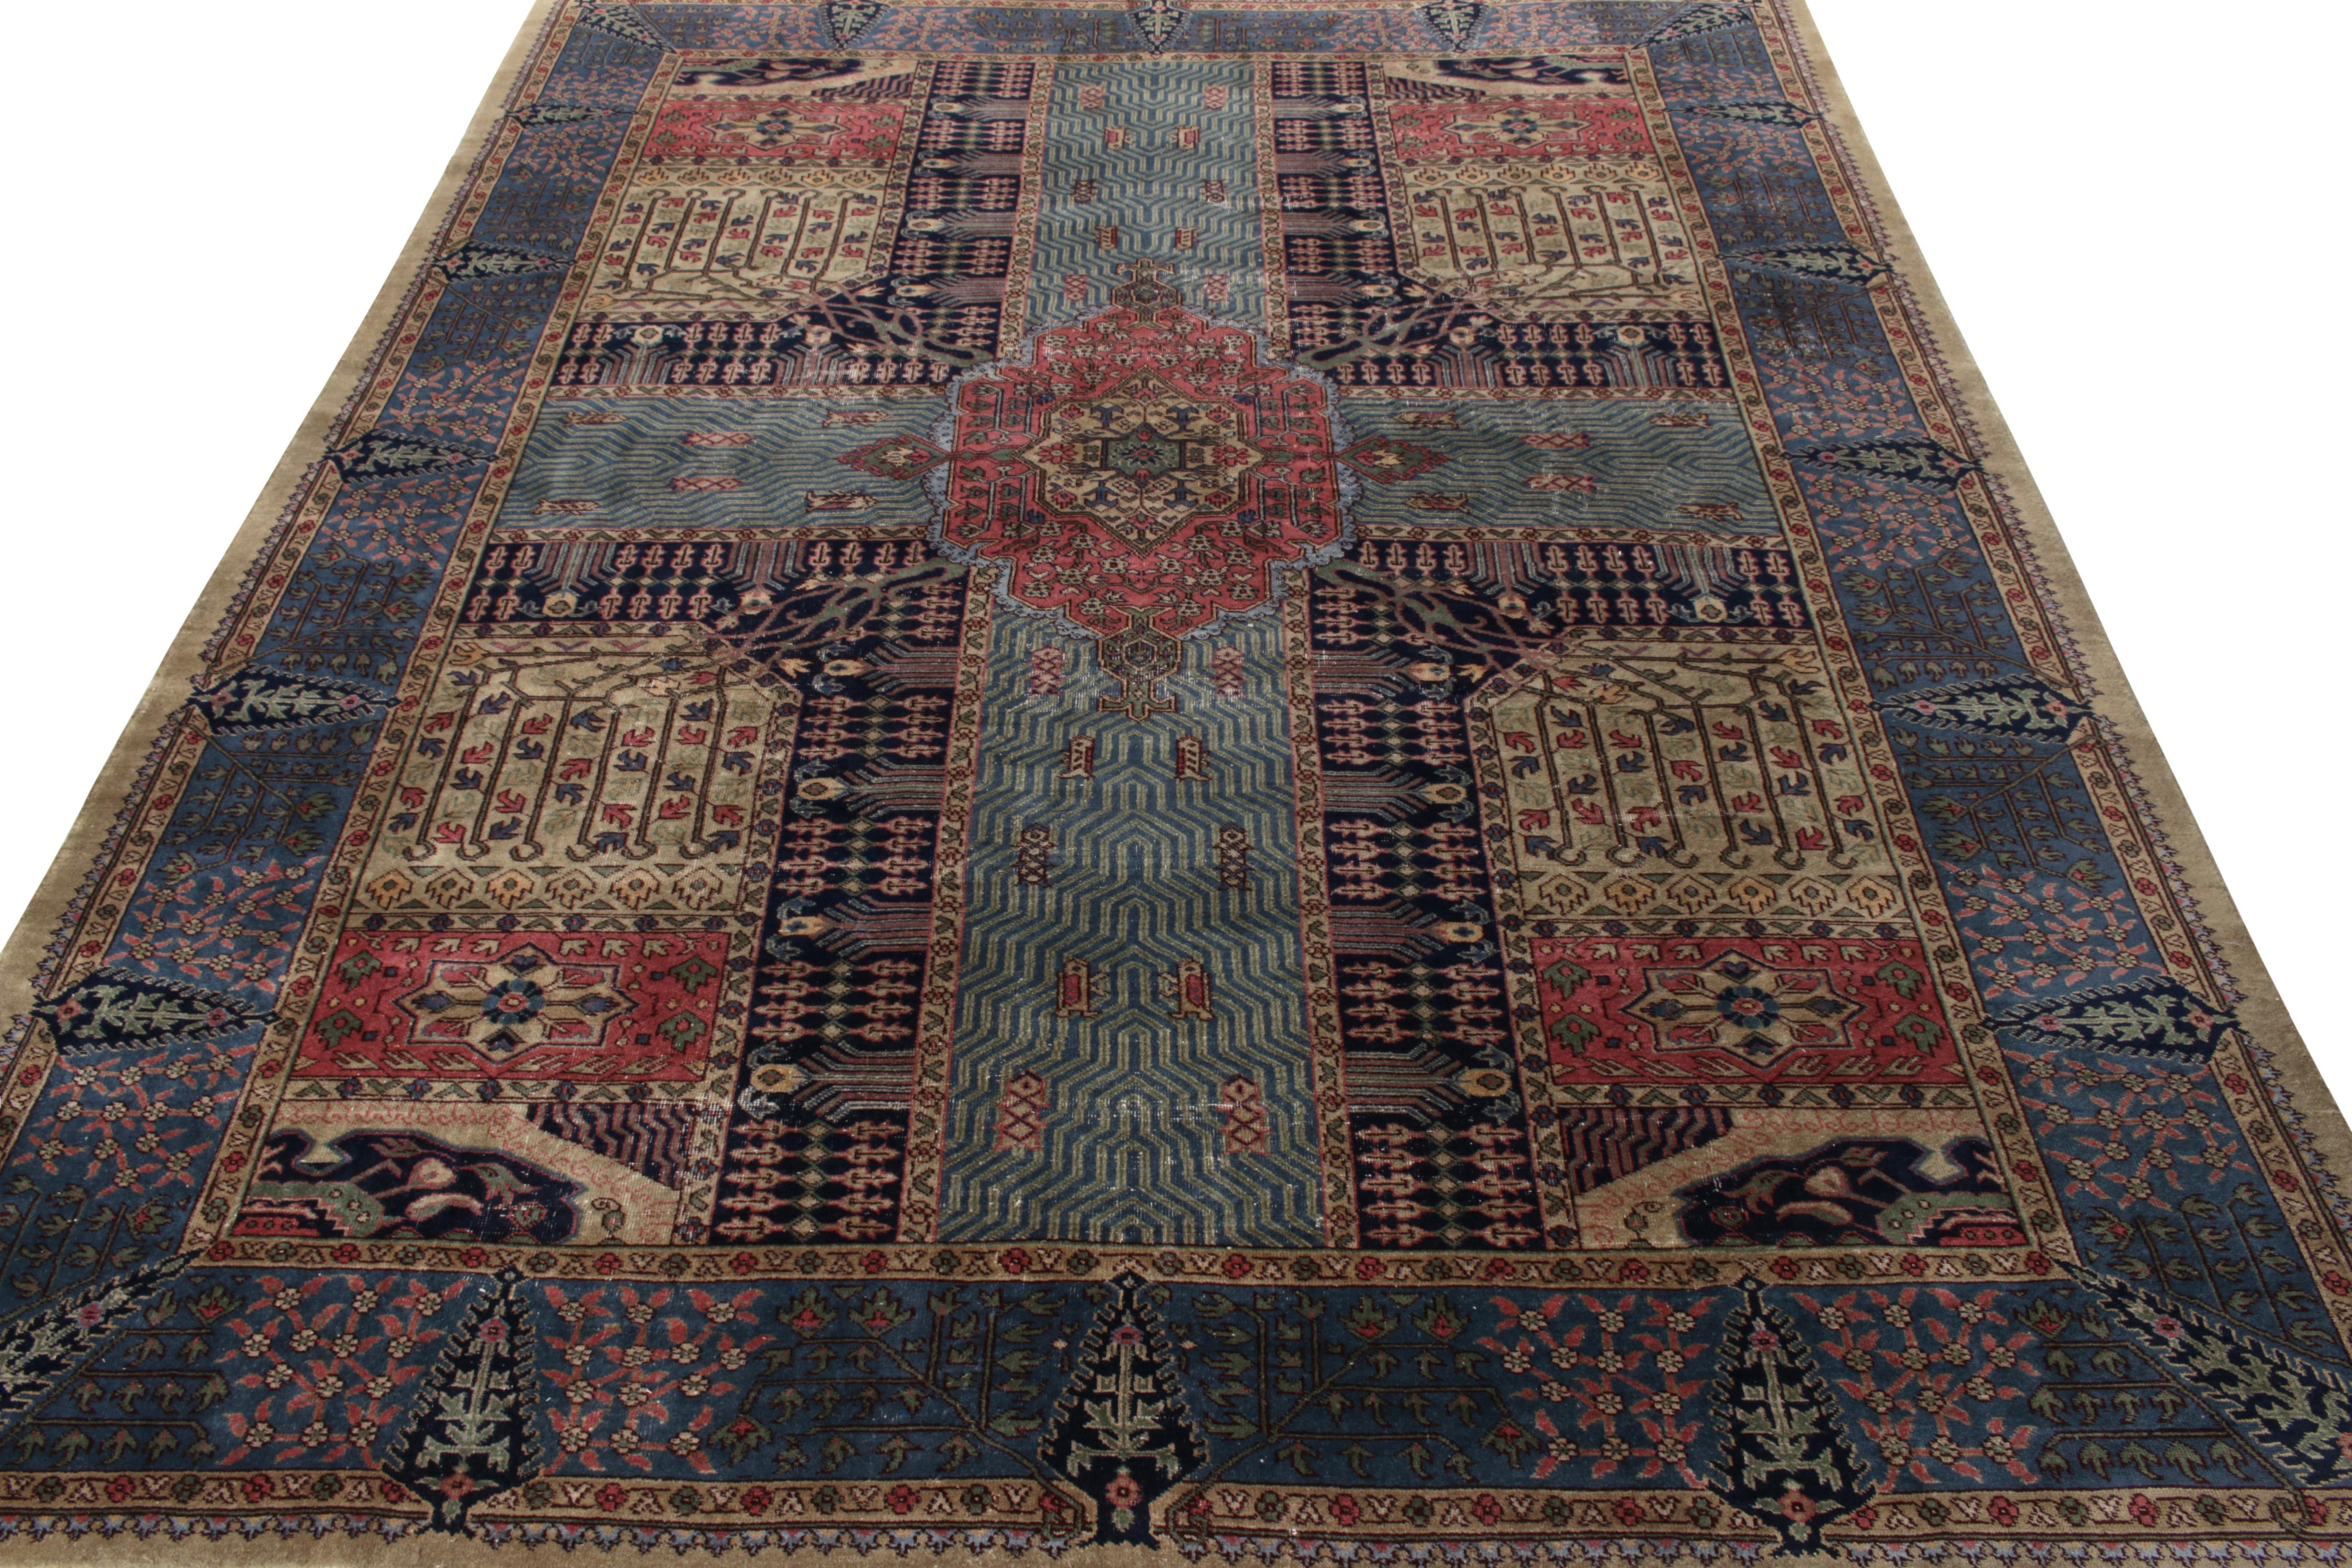 Hand-knotted in healthy lustrous wool circa 1920-1930, an antique 10 x 13 Indian rug inspired by rare 17th Century Persian garden rug designs—joining Rug & Kilim’s coveted Antique & Vintage collection. The rug enjoys a delicious blend of floral and